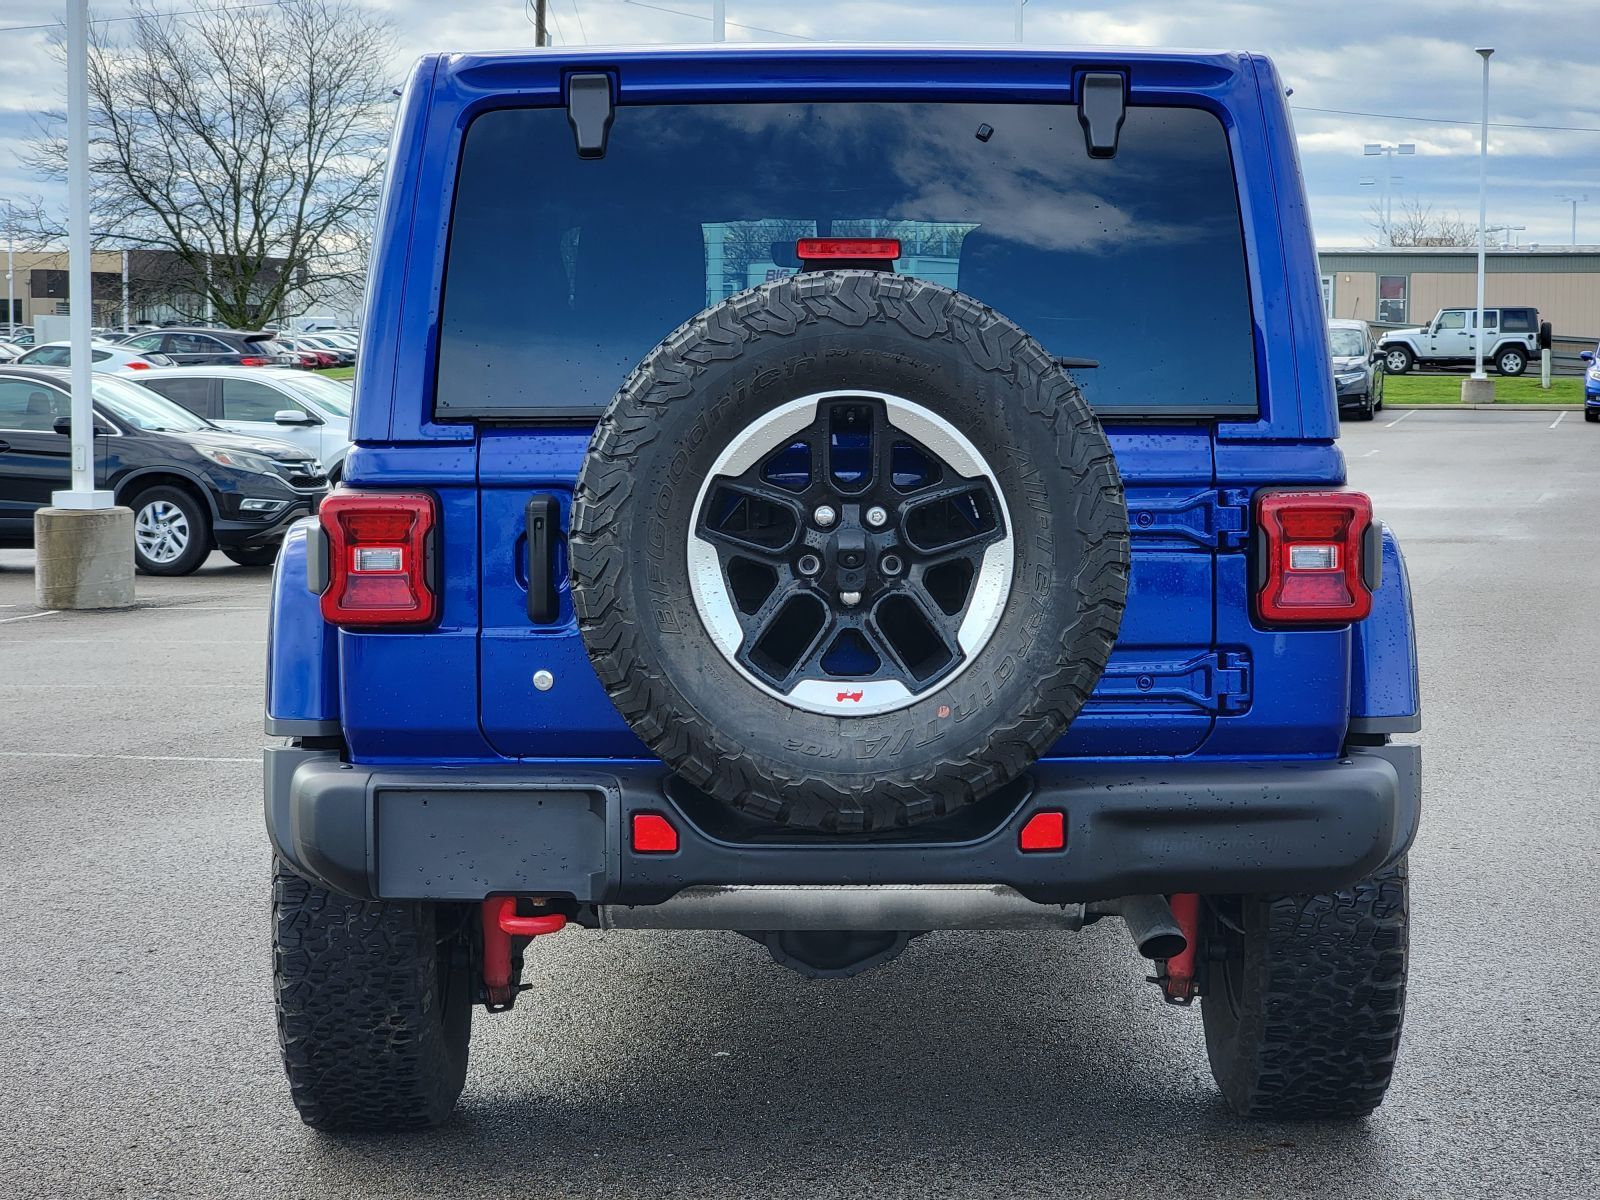 Used, 2019 Jeep Wrangler Unlimited Unlimited Rubicon, Blue, P0529-12